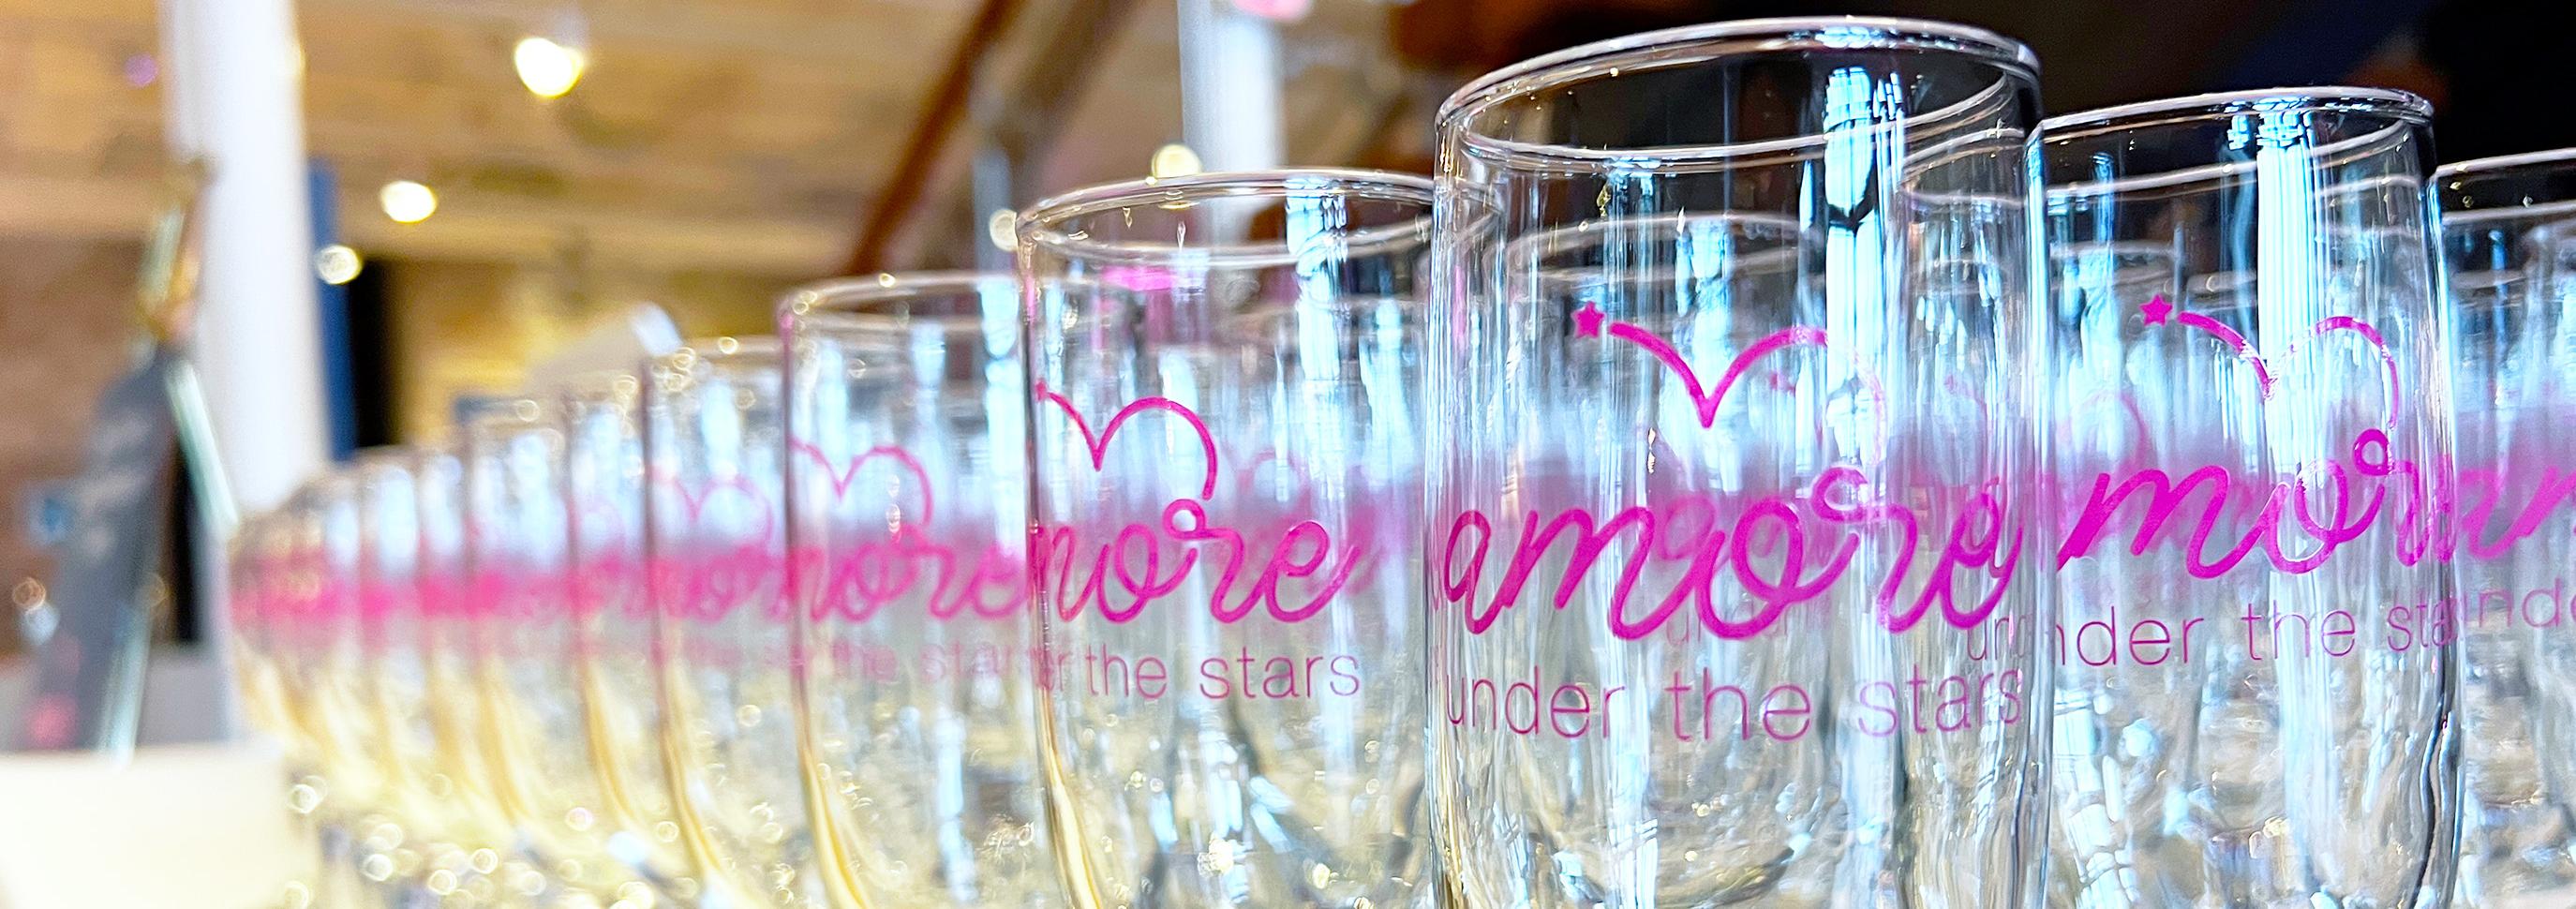 Glass Champagne with a logo in pink that reads "Amore Under the Stars" site lined up for display.